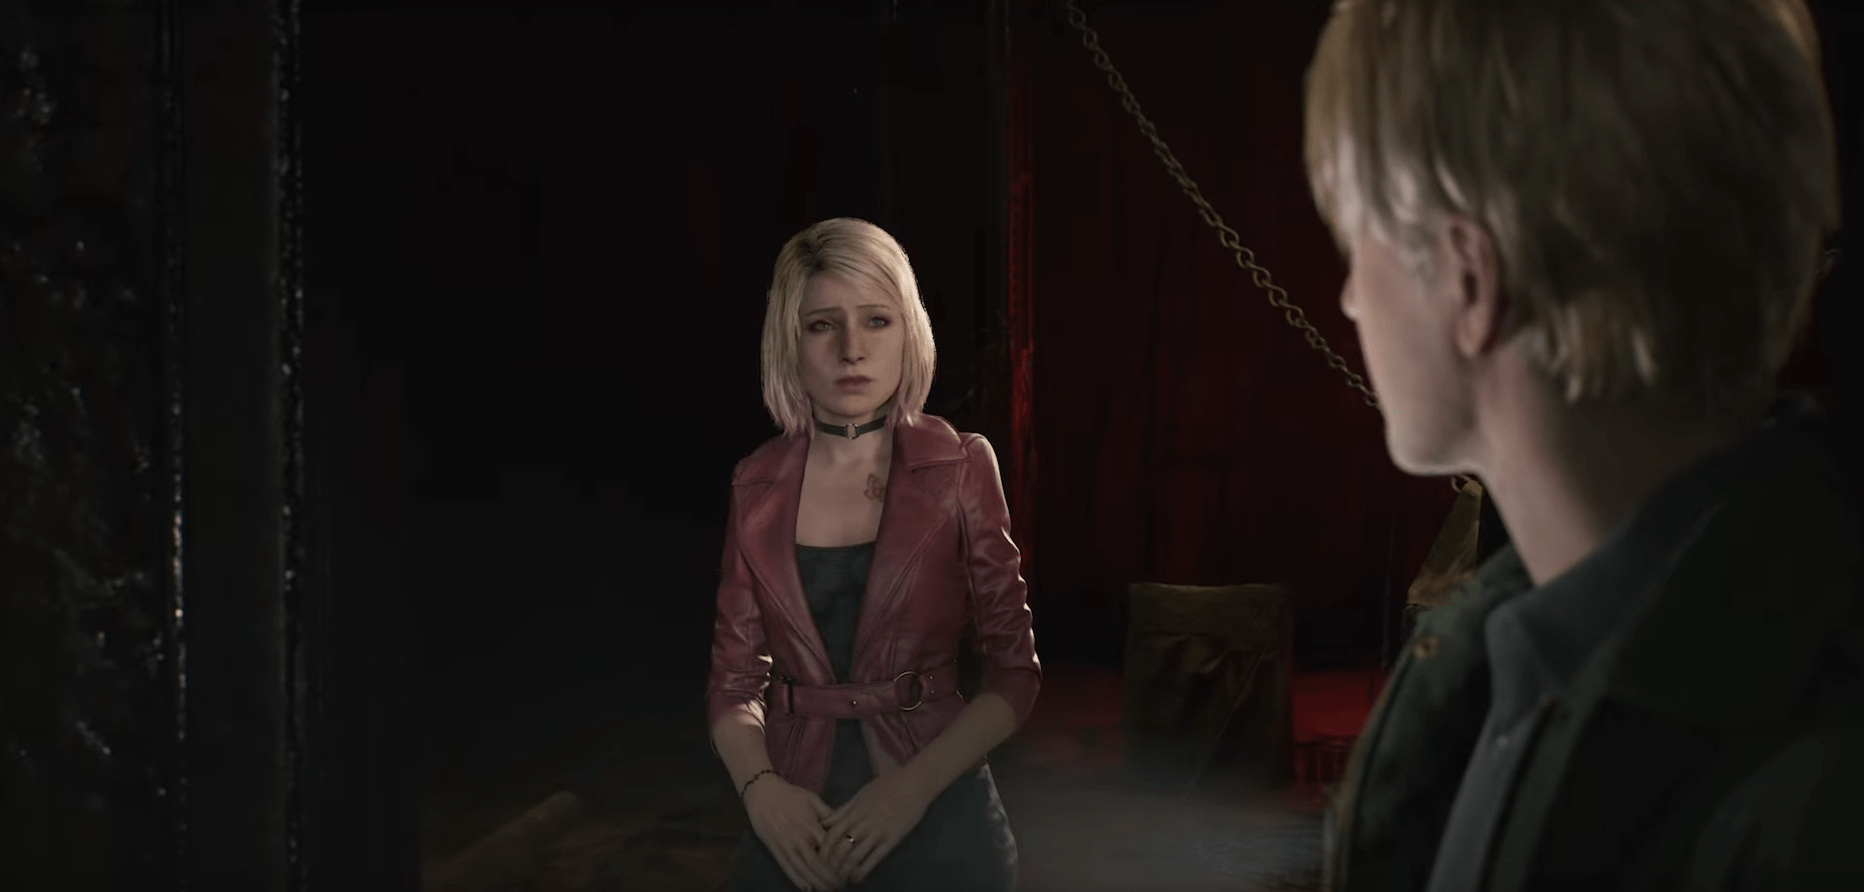 Maria as depicted in the Silent Hill 2 remake